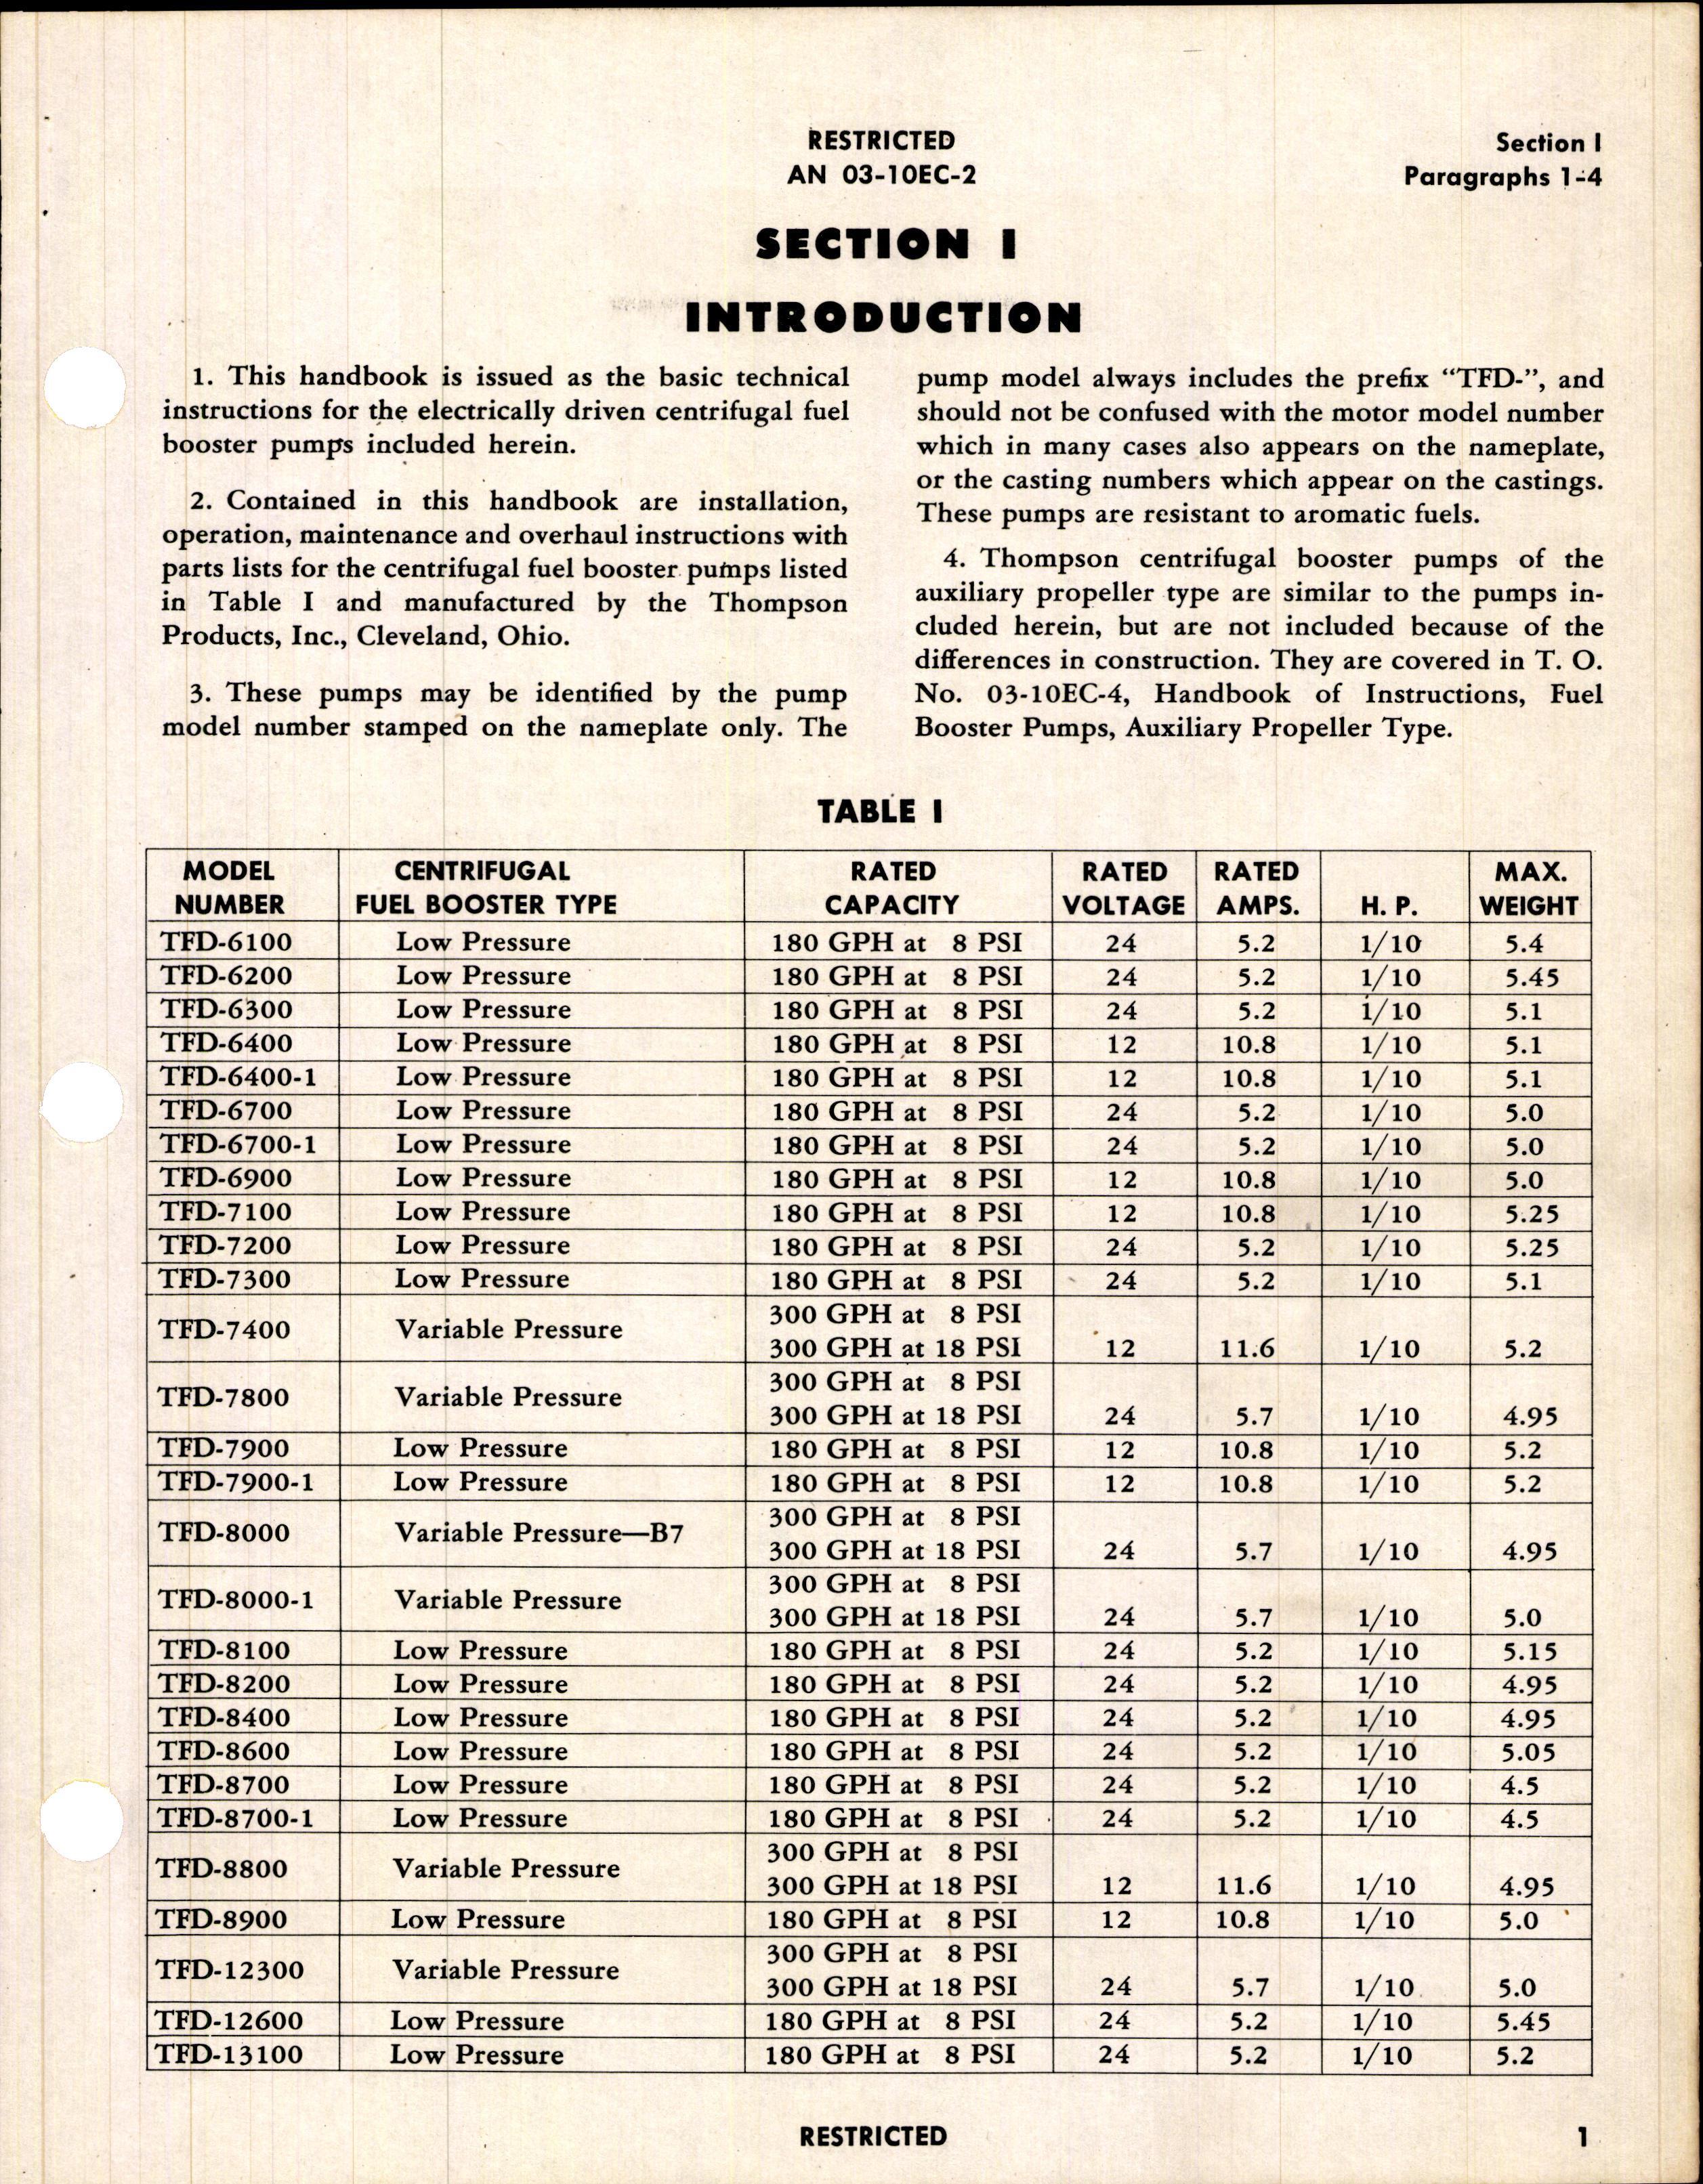 Sample page 5 from AirCorps Library document: Operation, Service, & Overhaul Instructions with Parts Catalog for Motor-Driven Fuel Booster Pumps